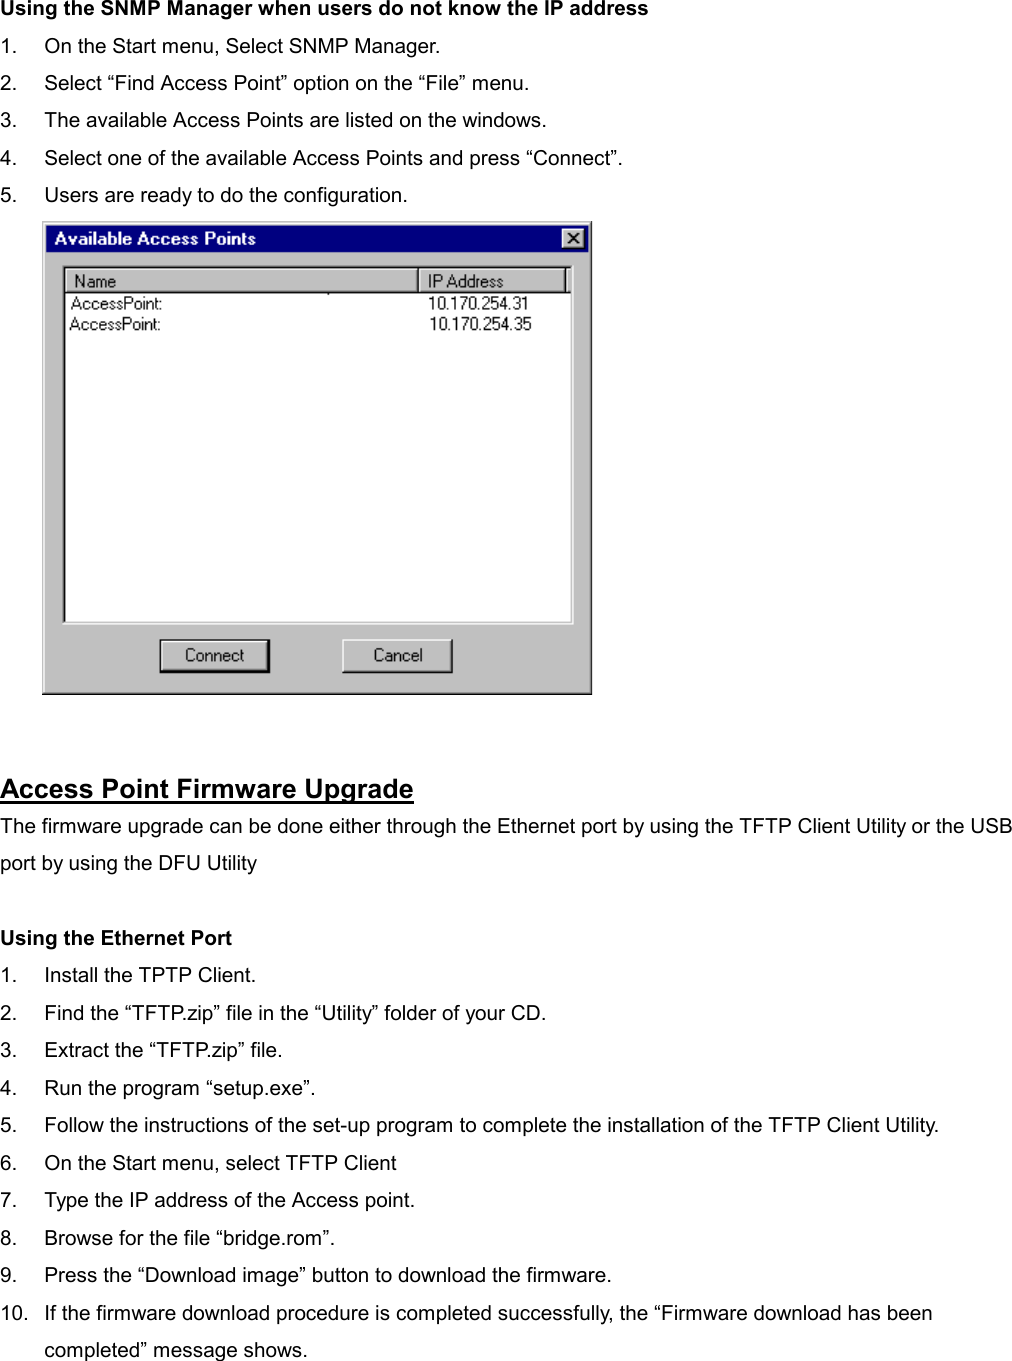   Using the SNMP Manager when users do not know the IP address 1.  On the Start menu, Select SNMP Manager. 2.  Select “Find Access Point” option on the “File” menu. 3.  The available Access Points are listed on the windows. 4.  Select one of the available Access Points and press “Connect”. 5.  Users are ready to do the configuration.   Access Point Firmware Upgrade The firmware upgrade can be done either through the Ethernet port by using the TFTP Client Utility or the USB port by using the DFU Utility  Using the Ethernet Port 1.  Install the TPTP Client. 2.  Find the “TFTP.zip” file in the “Utility” folder of your CD. 3.  Extract the “TFTP.zip” file. 4.  Run the program “setup.exe”. 5.  Follow the instructions of the set-up program to complete the installation of the TFTP Client Utility. 6.  On the Start menu, select TFTP Client 7.  Type the IP address of the Access point. 8.  Browse for the file “bridge.rom”. 9.  Press the “Download image” button to download the firmware. 10.  If the firmware download procedure is completed successfully, the “Firmware download has been completed” message shows.  